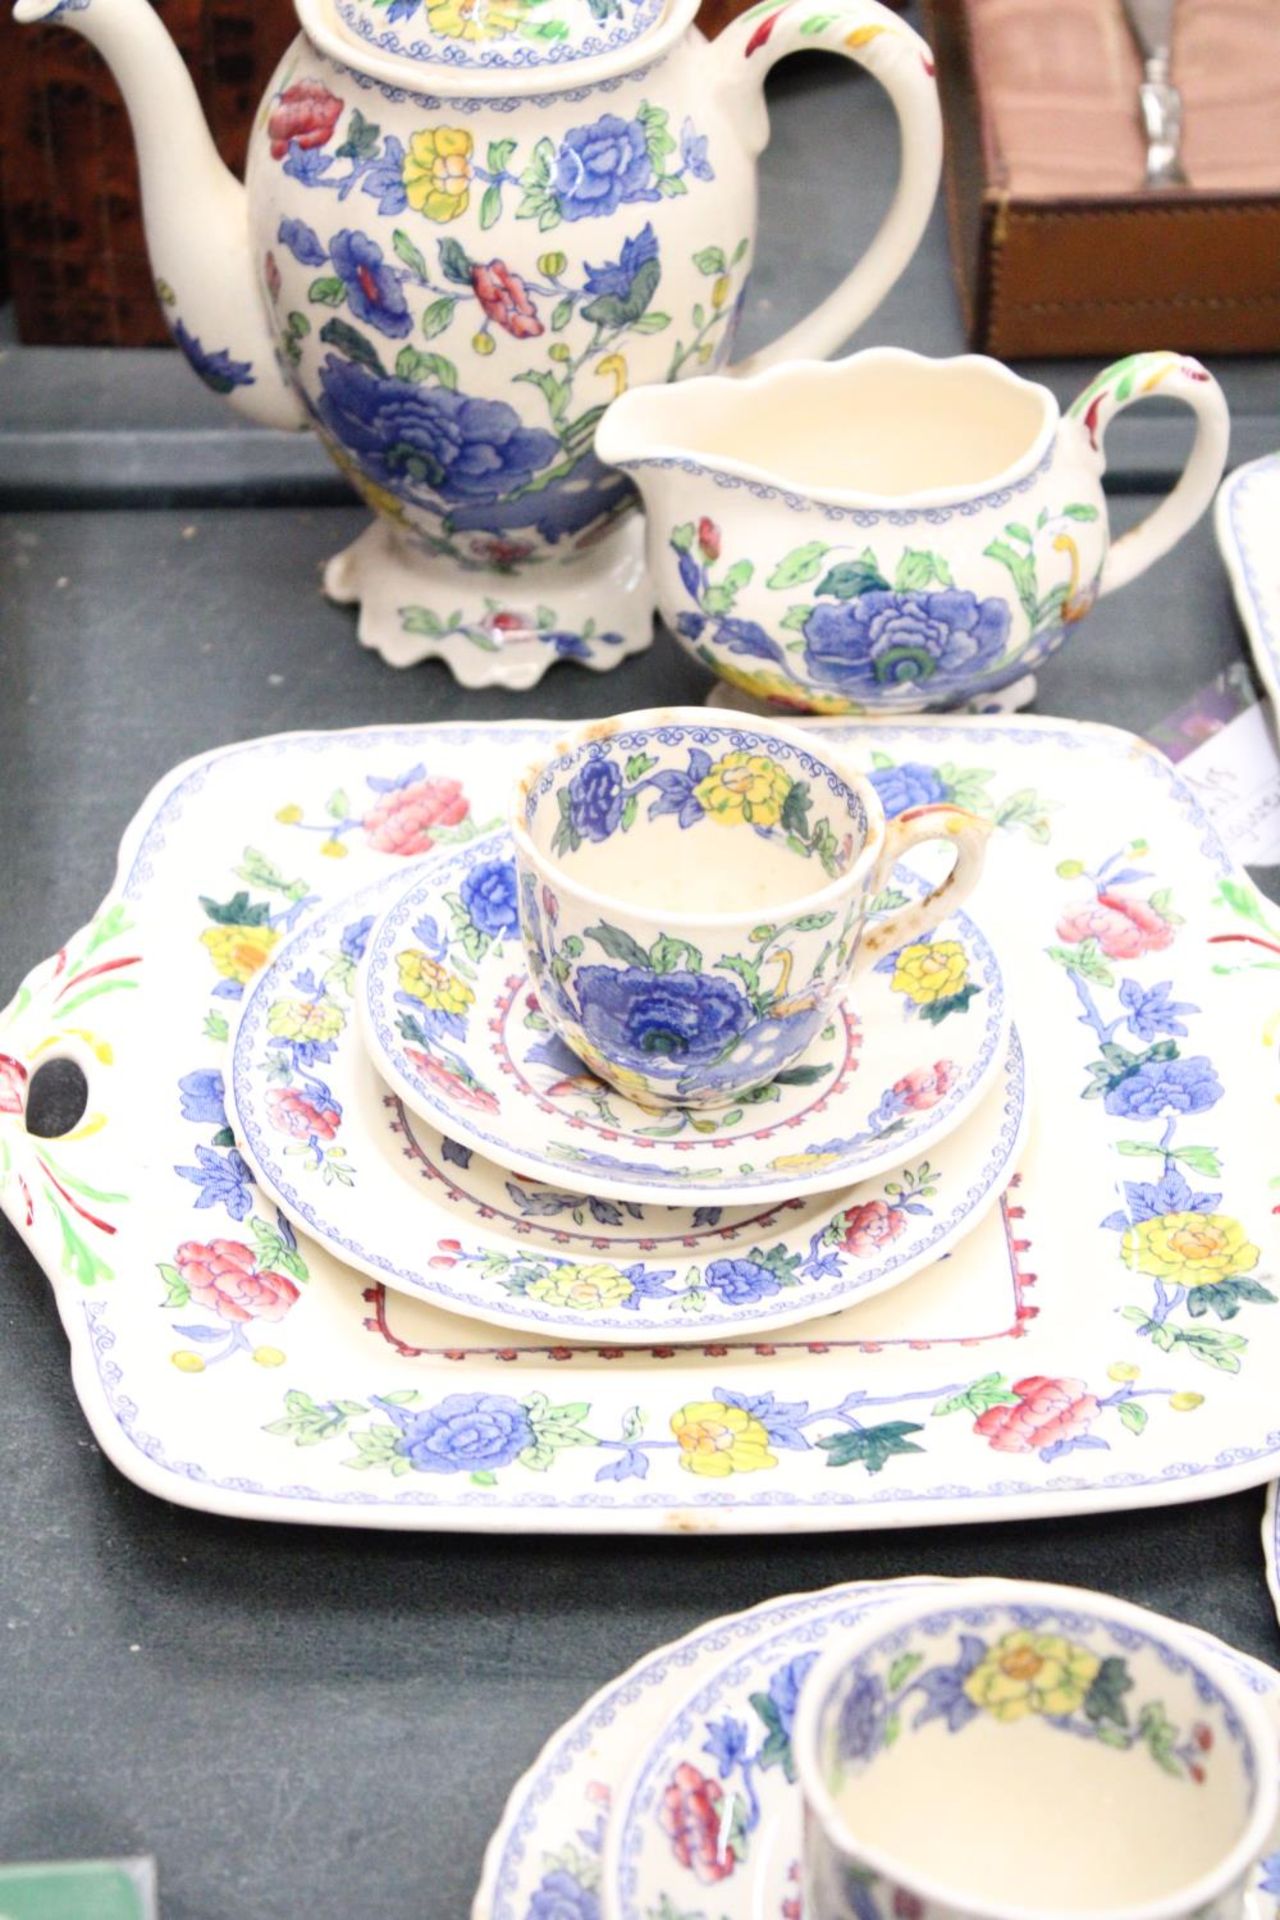 A QUANTITY OF MASONS "REGENCY" WARE TO INCLUDE A TEAPOT, CUPS, SAUCERS, PLATES ETC - Image 3 of 5